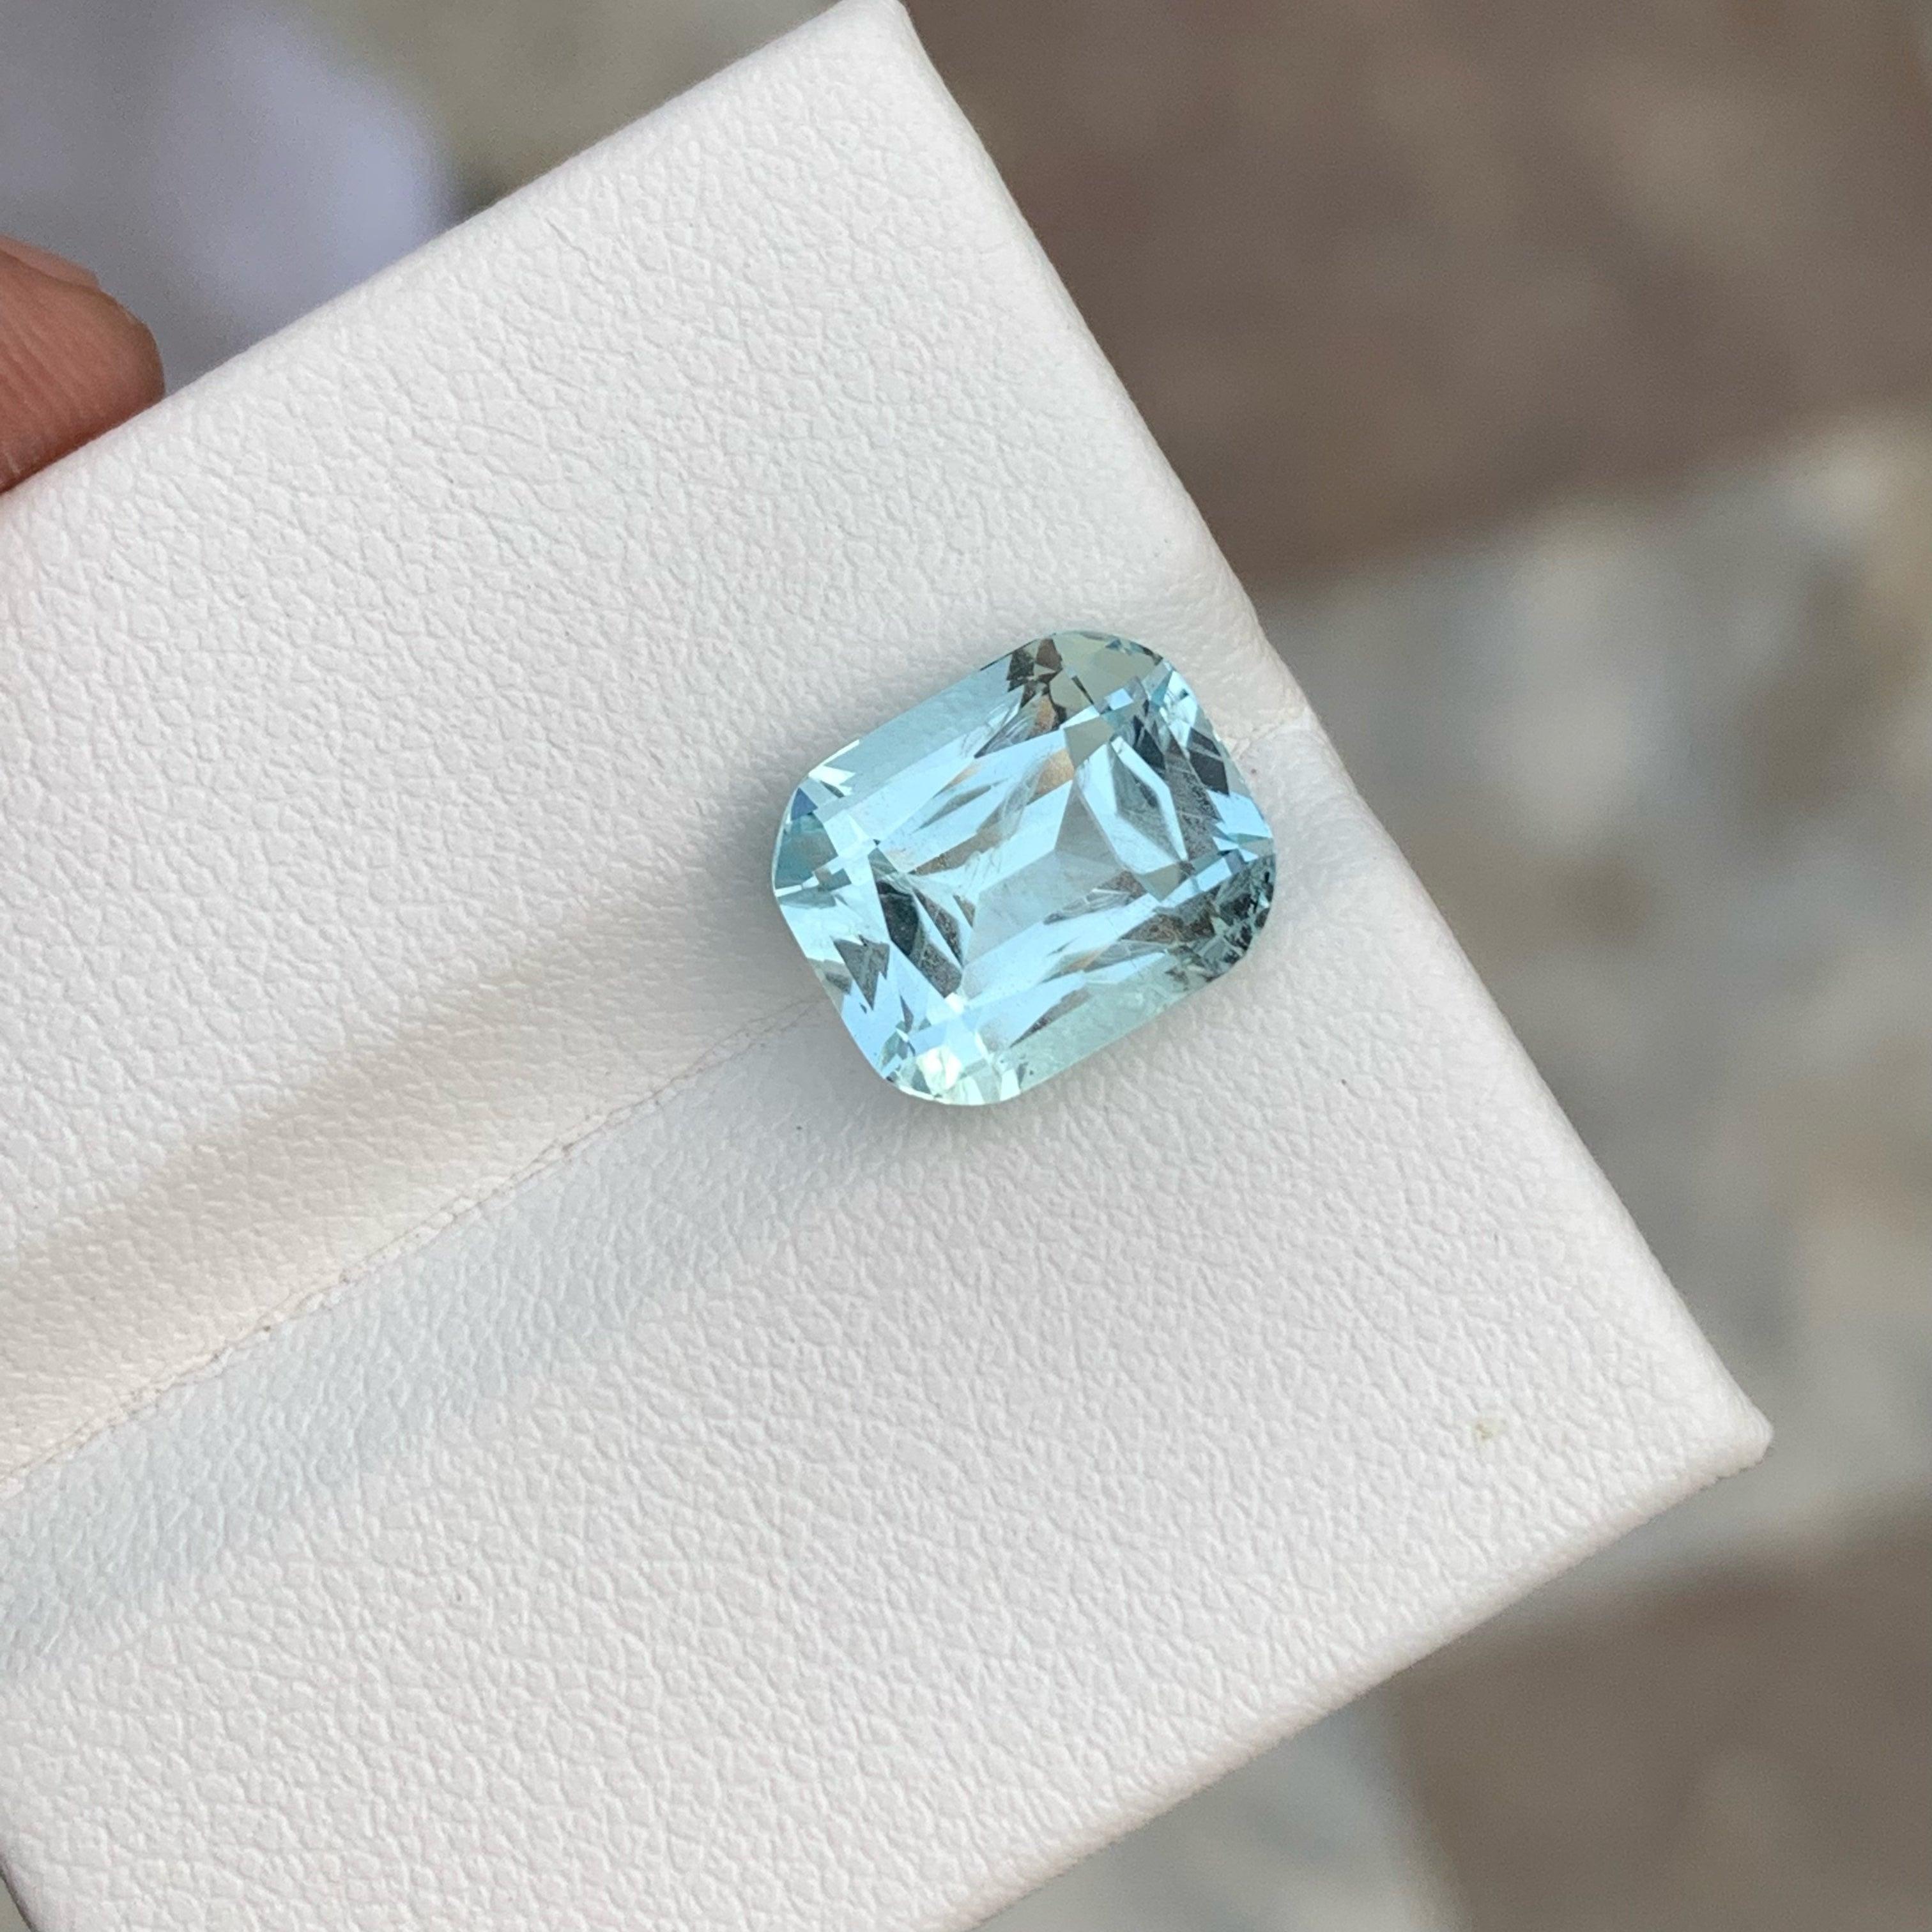 Natural Aquamarine stone, available for sale at wholesale price natural high quality 5.45 Carats VVS Clarity Loose Aquamarine from Pakistan.

Product Information:
GEMSTONE NAME:	Exquisite Sea Blue Cut Aquamarine
WEIGHT:	5.45 Carats
DIMENSIONS:	11.1